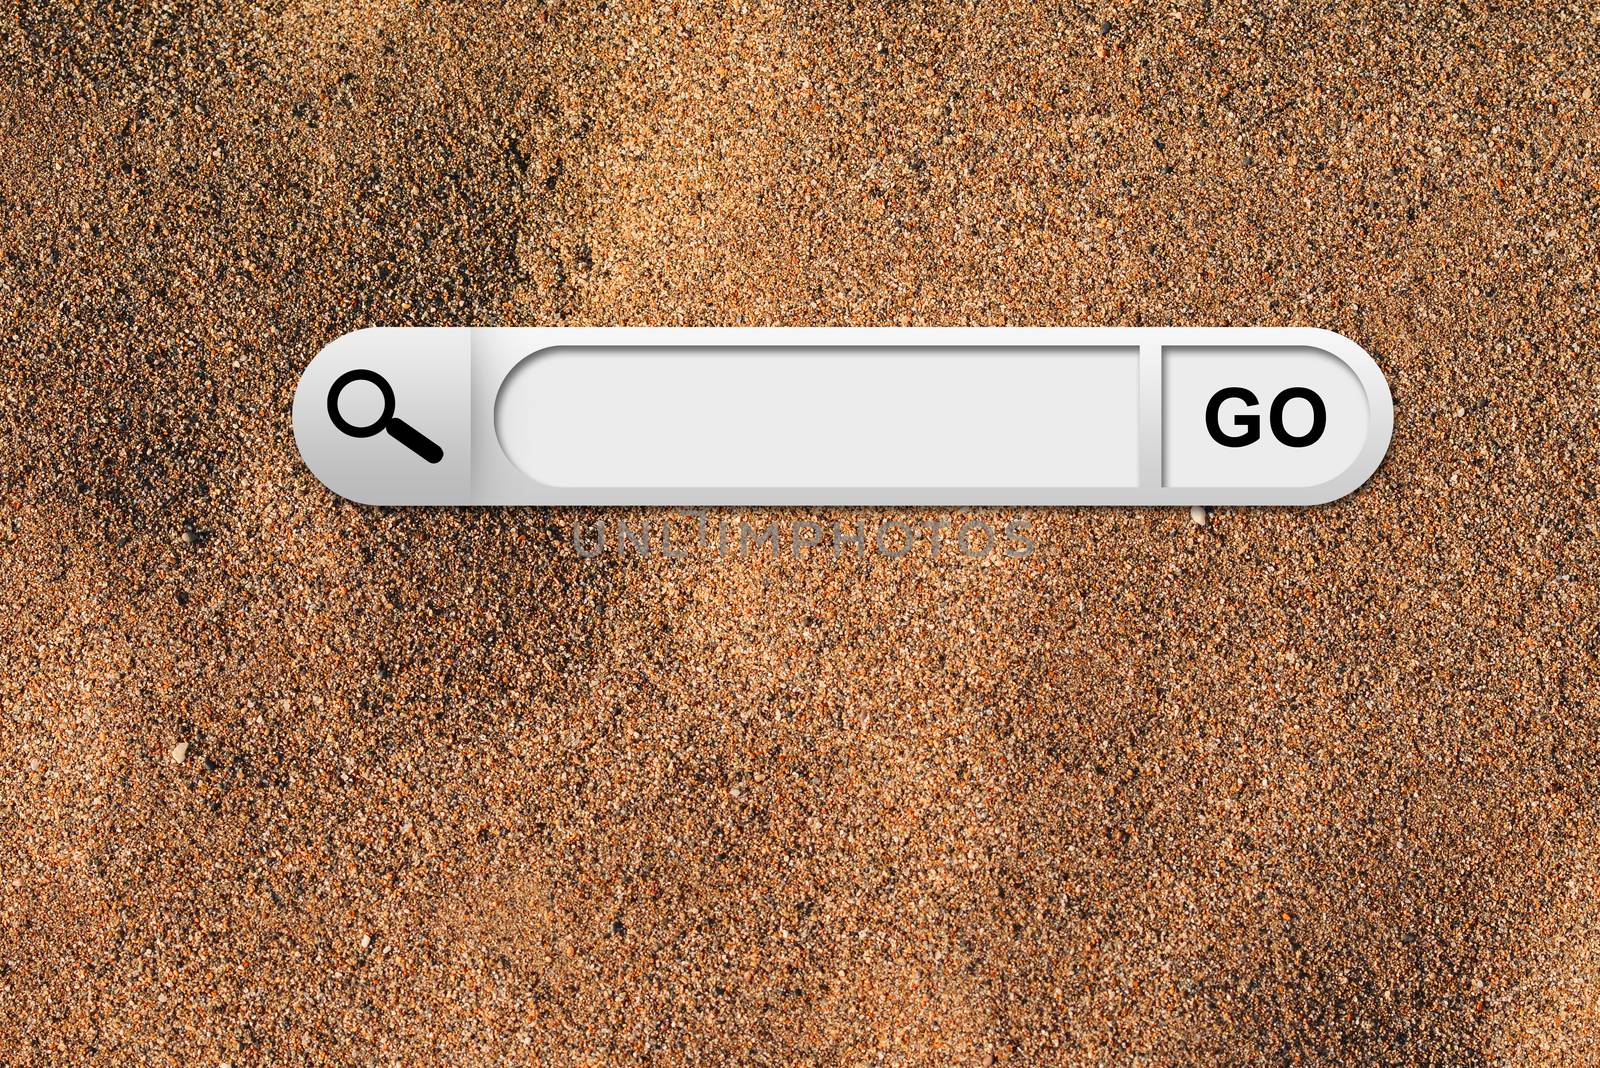 Search bar in browser. Yellow sand surface on background